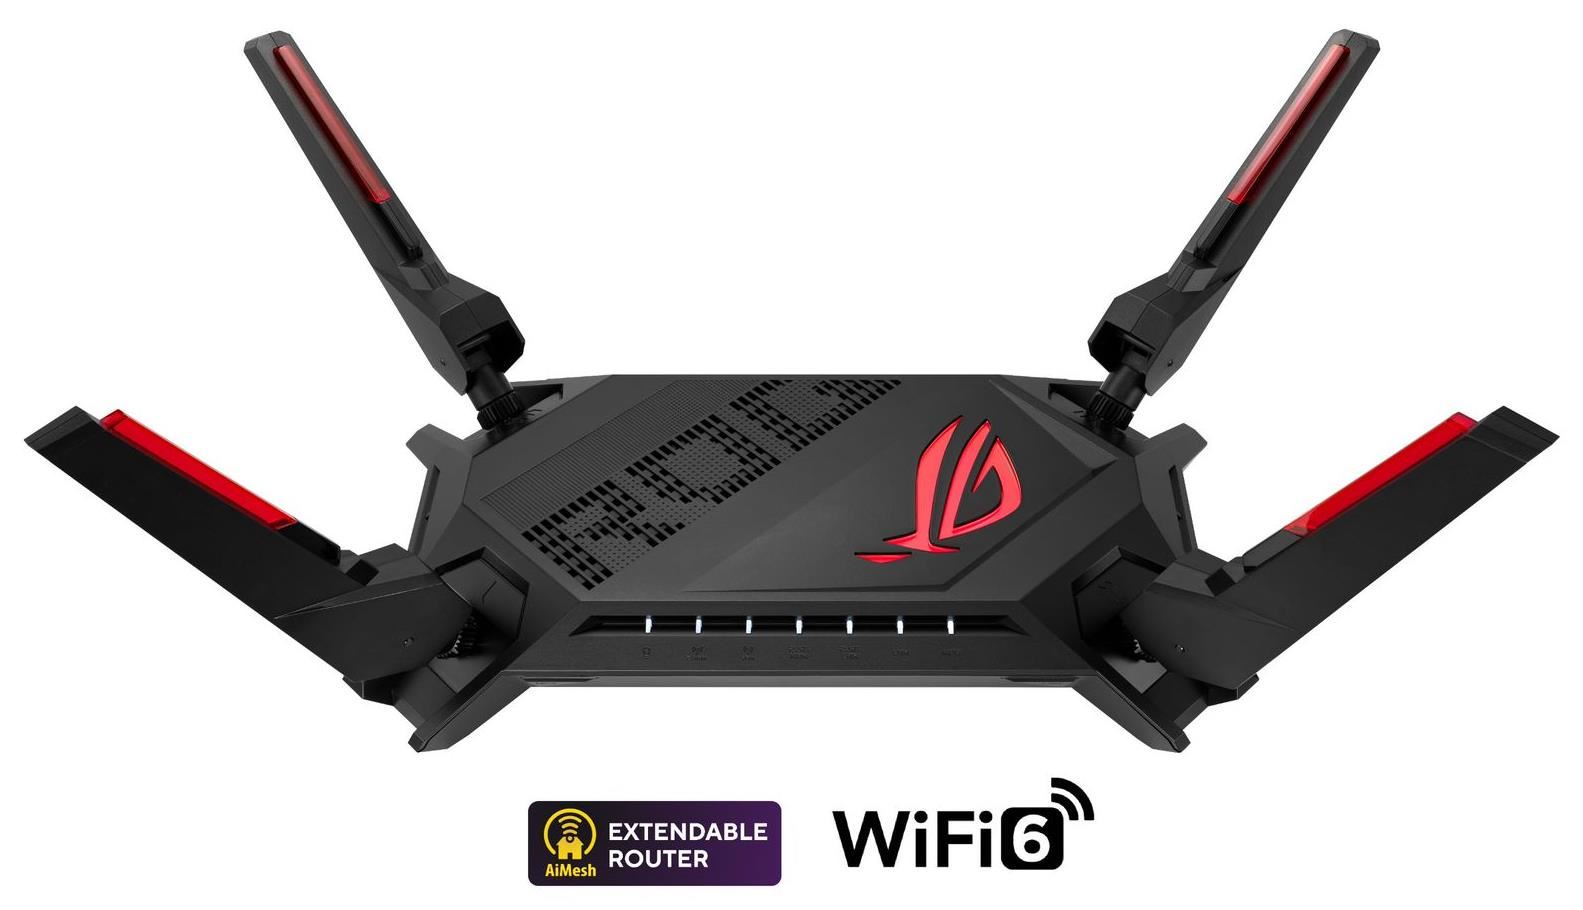 ASUS GT-AX6000 (AX6000) WiFi 6 Extendable Gaming Router,  2.5G porty,  AiMesh,  4G/ 5G Mobile Tethering0 